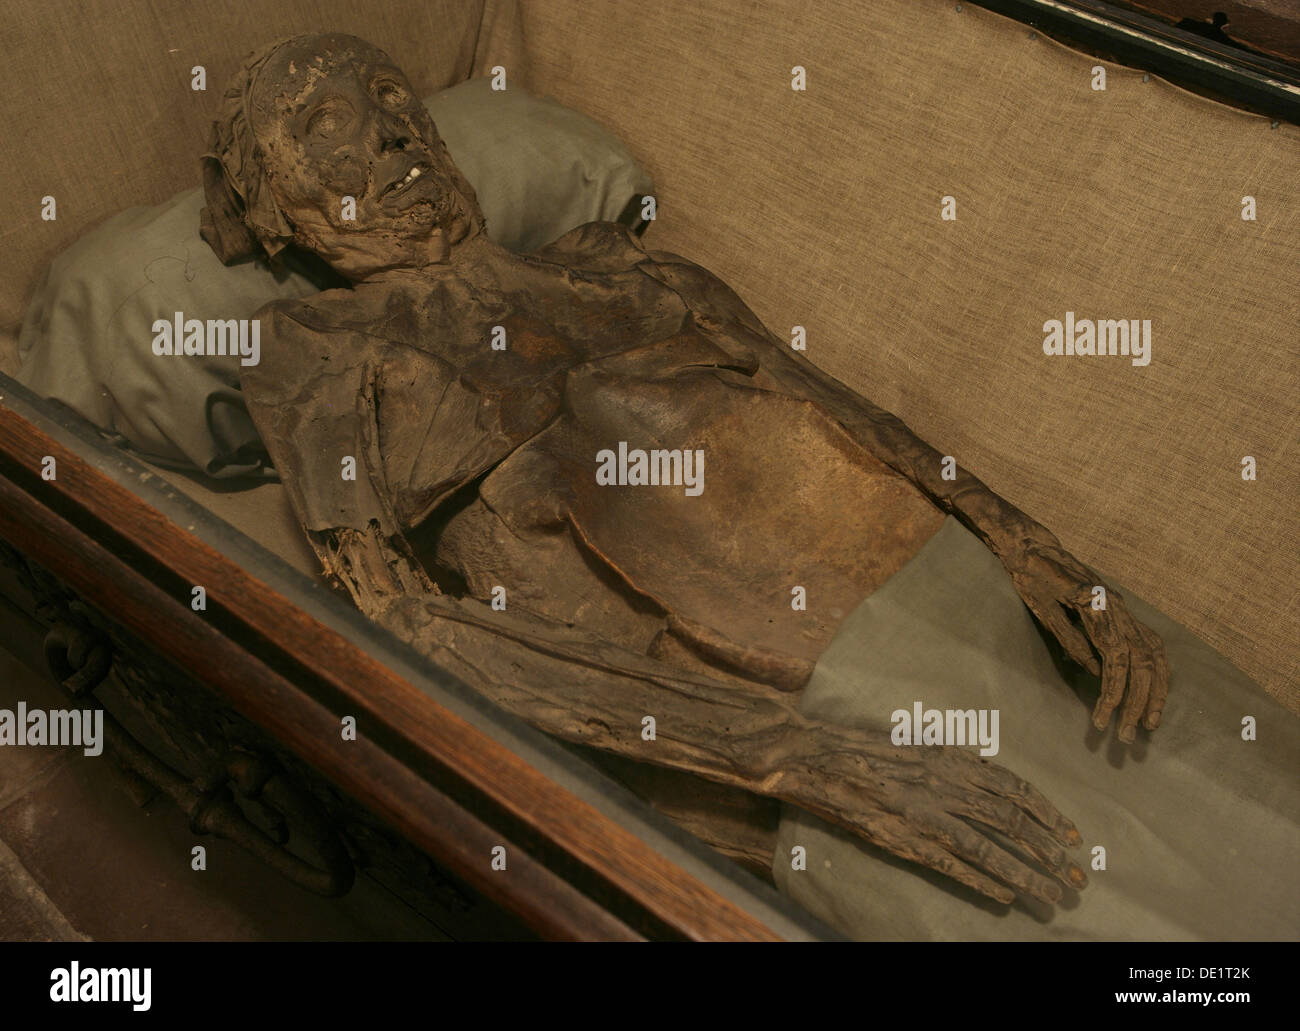 (dpa FILE) - An archive picture, dated 10 April 2006, shows the mummified remains Maria of Engelbrechten, nee Mevius, the wife of chancellor of the former duchies of Bremen-Verden, G. B. of Engelbrechten,  in a wooden coffin in the so-called 'Bleikeller', underground crypt, in the basement of the Saint Petri Cathedral in Bremen, Germany. Maria of Engelbrechten died on 23 November 1734. Despite the eery atomsphere, a tour through the crypt offers visitors an opportunity to reflect on death and mortality. The crypt accommodates eight mummies in all. Photo: Ingo Wagner Stock Photo